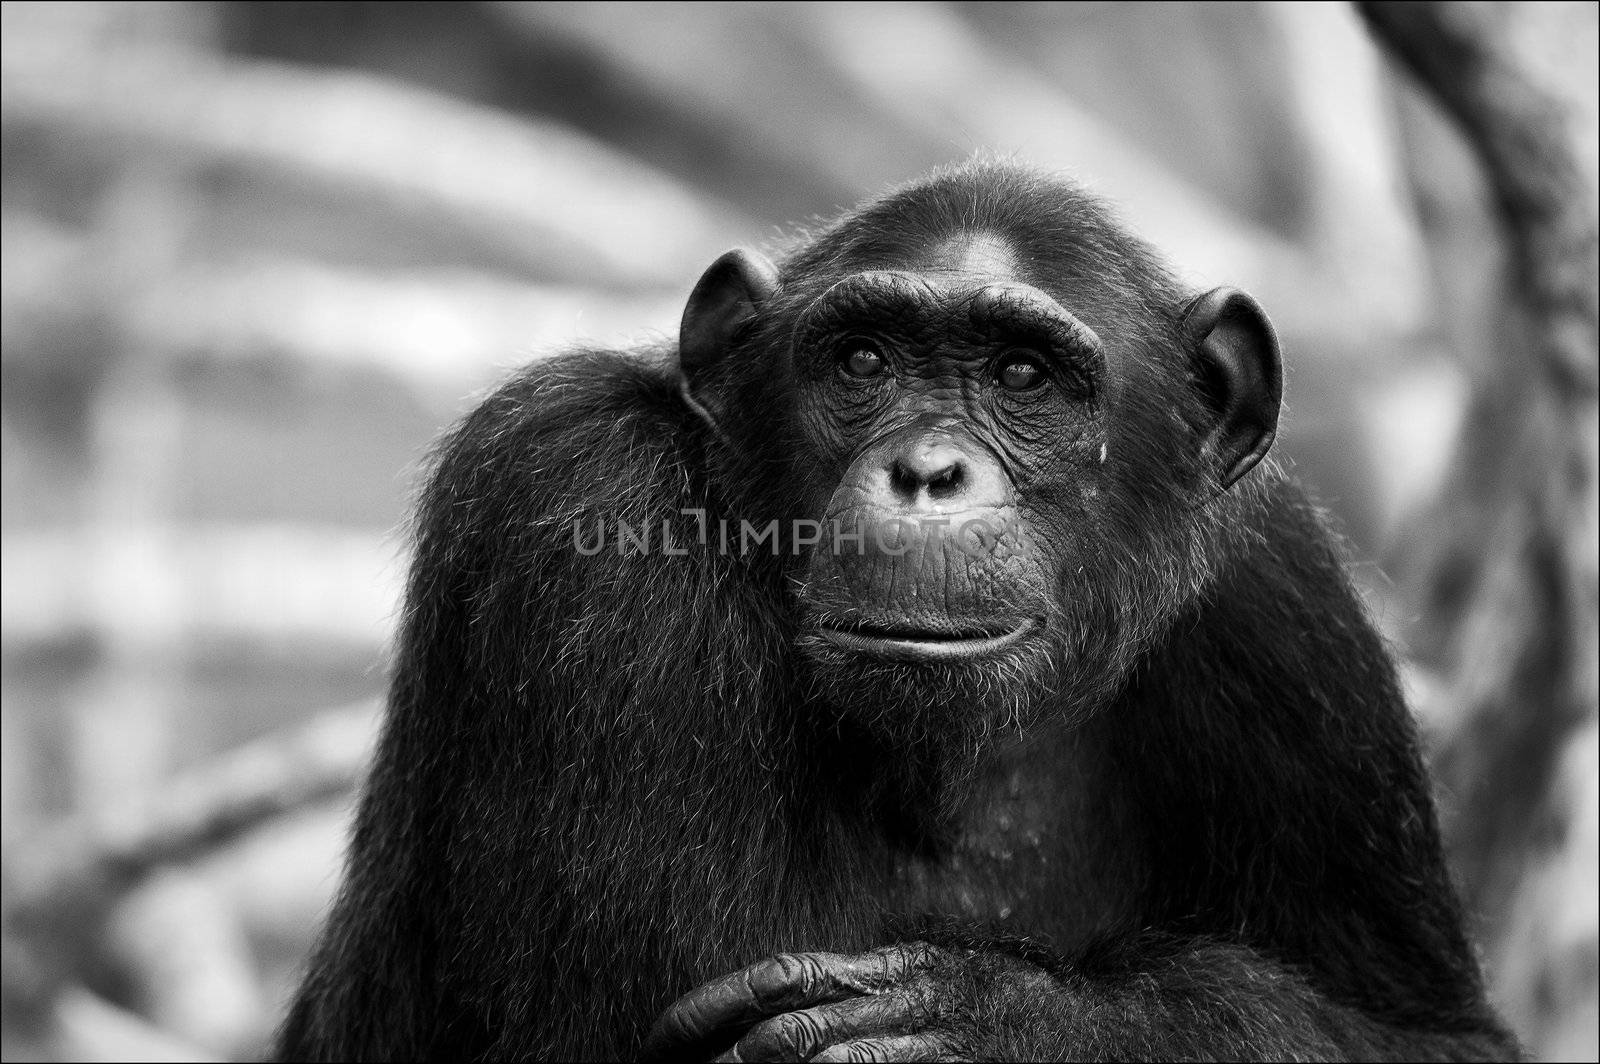 It is black a white portrait of a wild chimpanzee at a short distance.